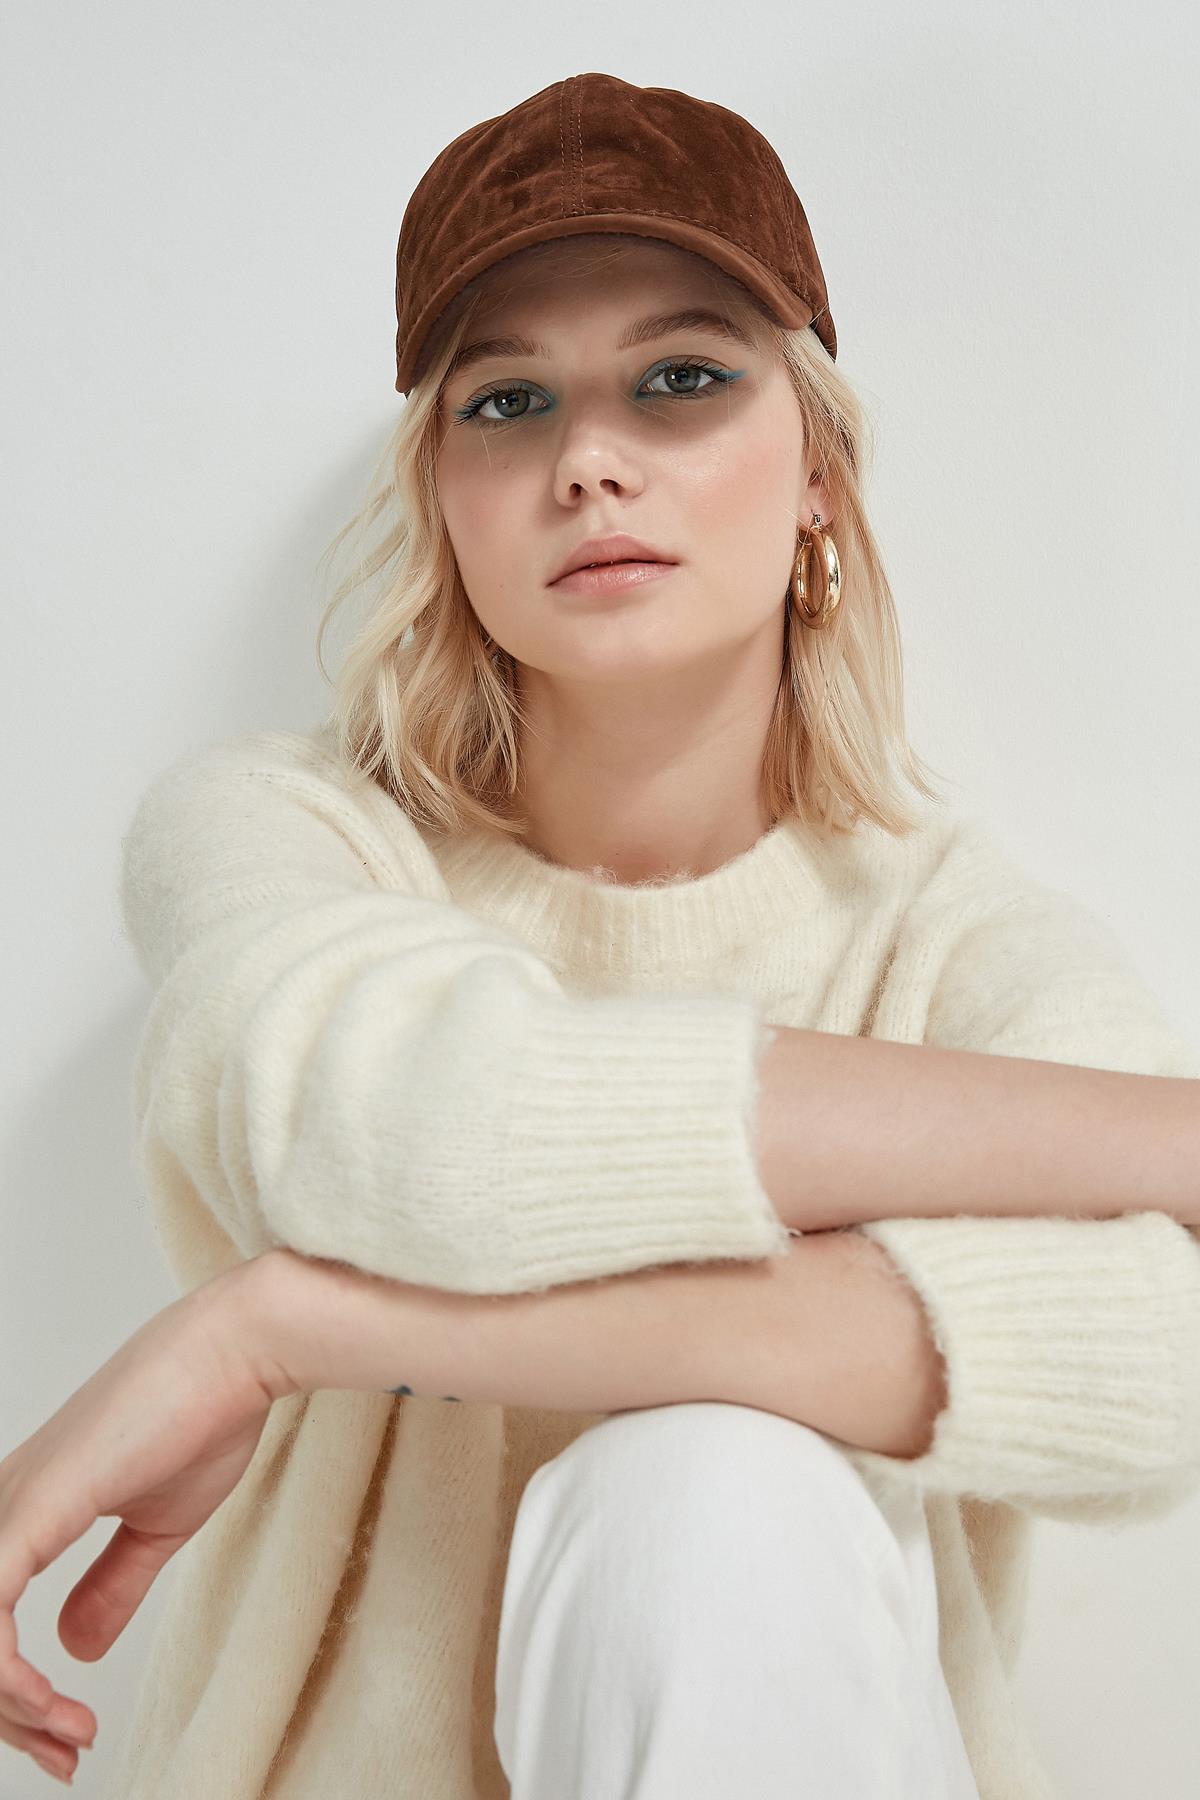 A model wears NSV11145 - Suede Cap - Brown, wholesale Hat of Nesvay to display at Lonca